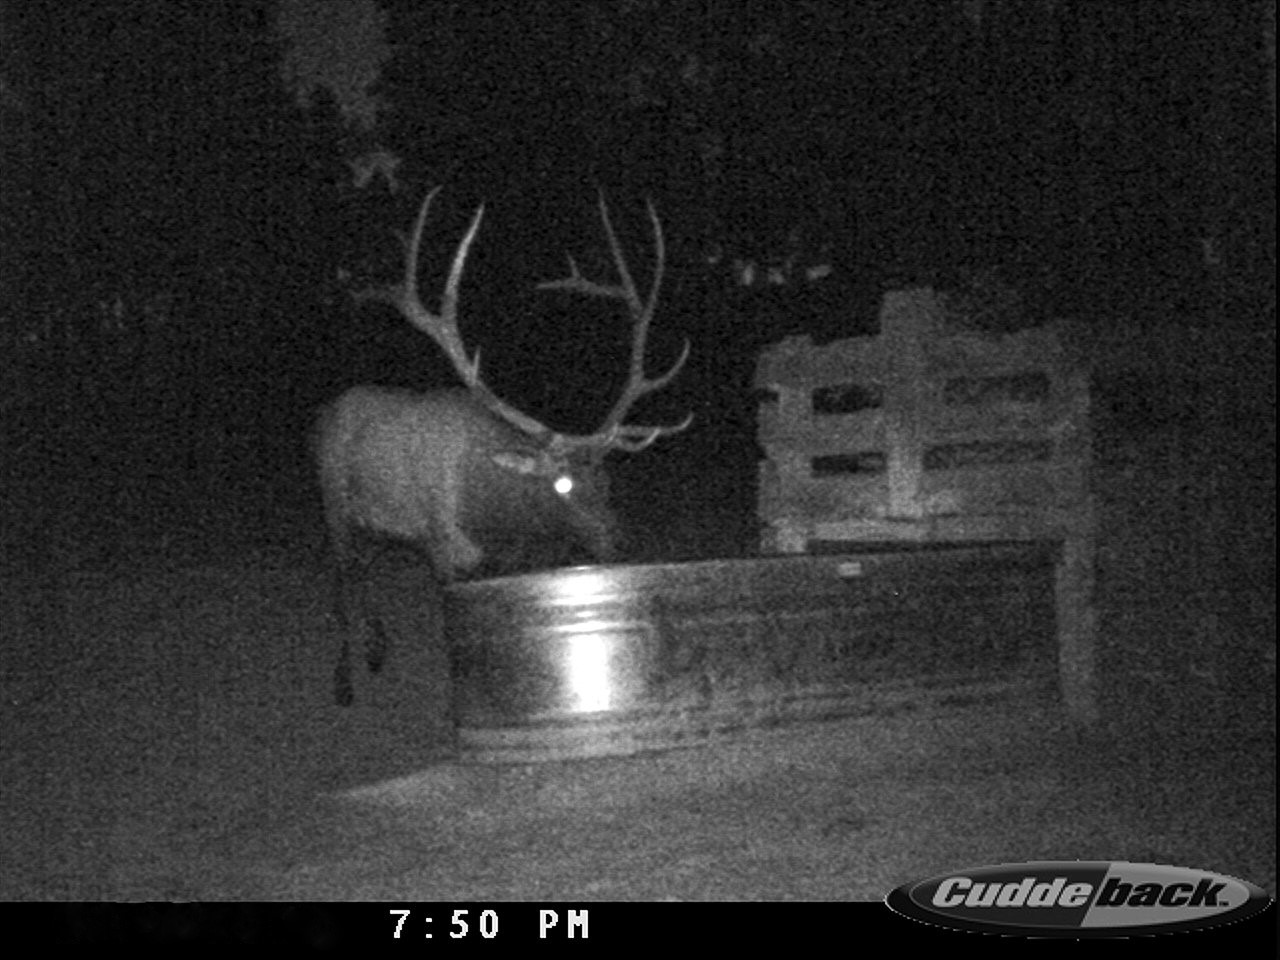 TrailCamCDY_0043 (2).JPG  by Wild Bill Hiccup